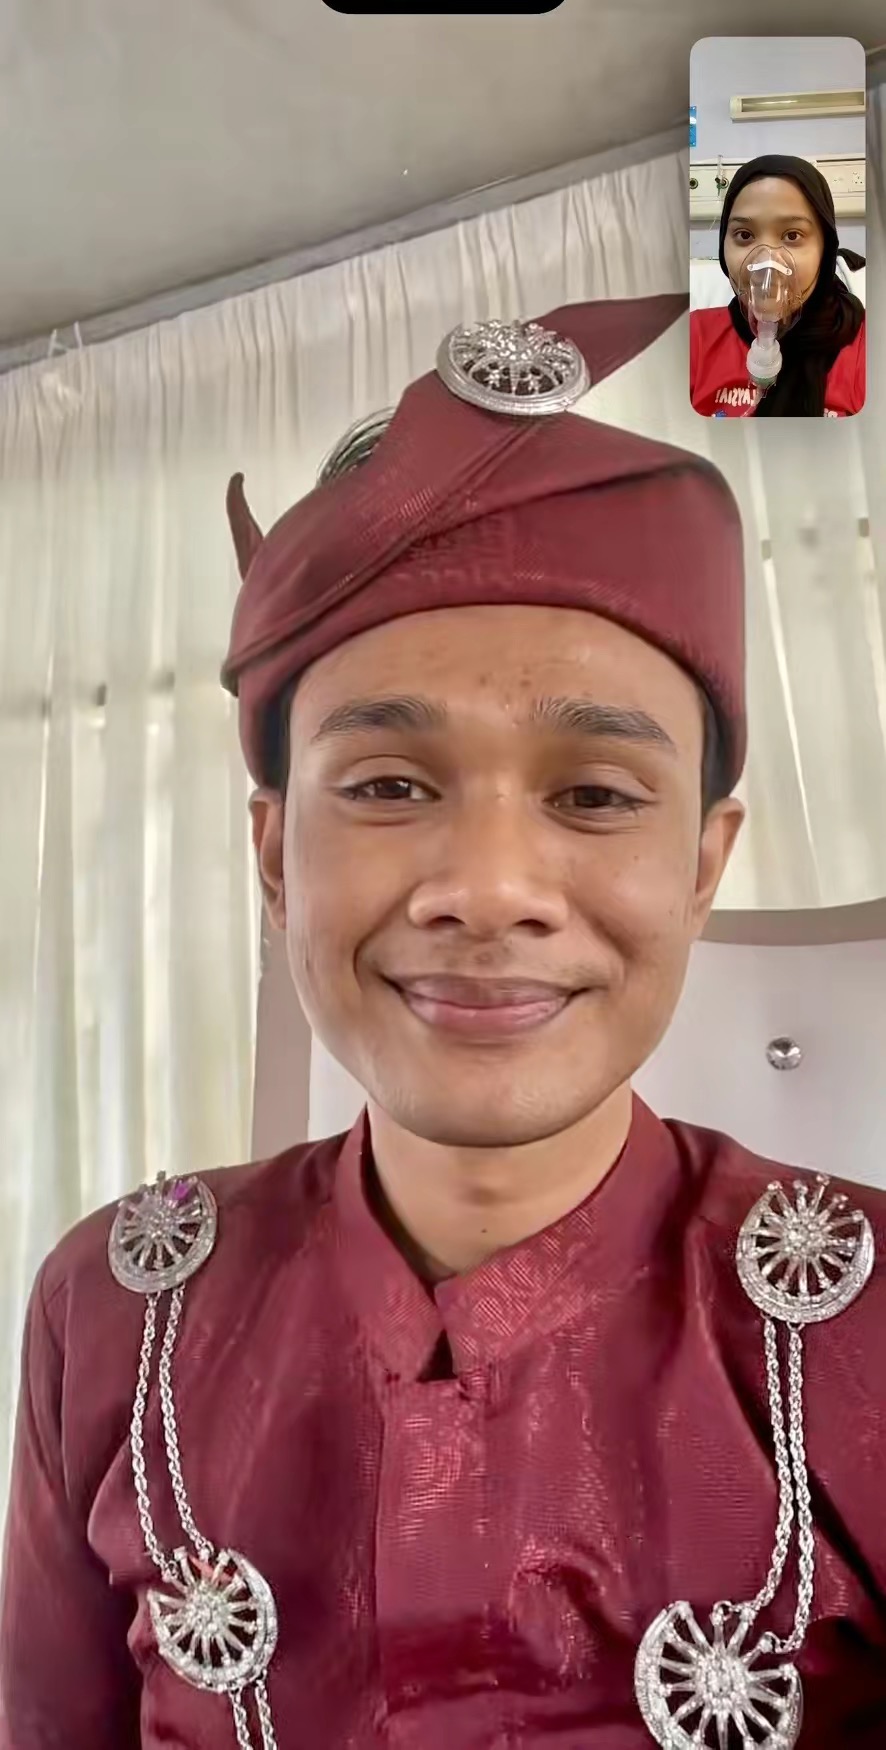 Malay man in a wedding ceremony video called her wife who got hospitalised